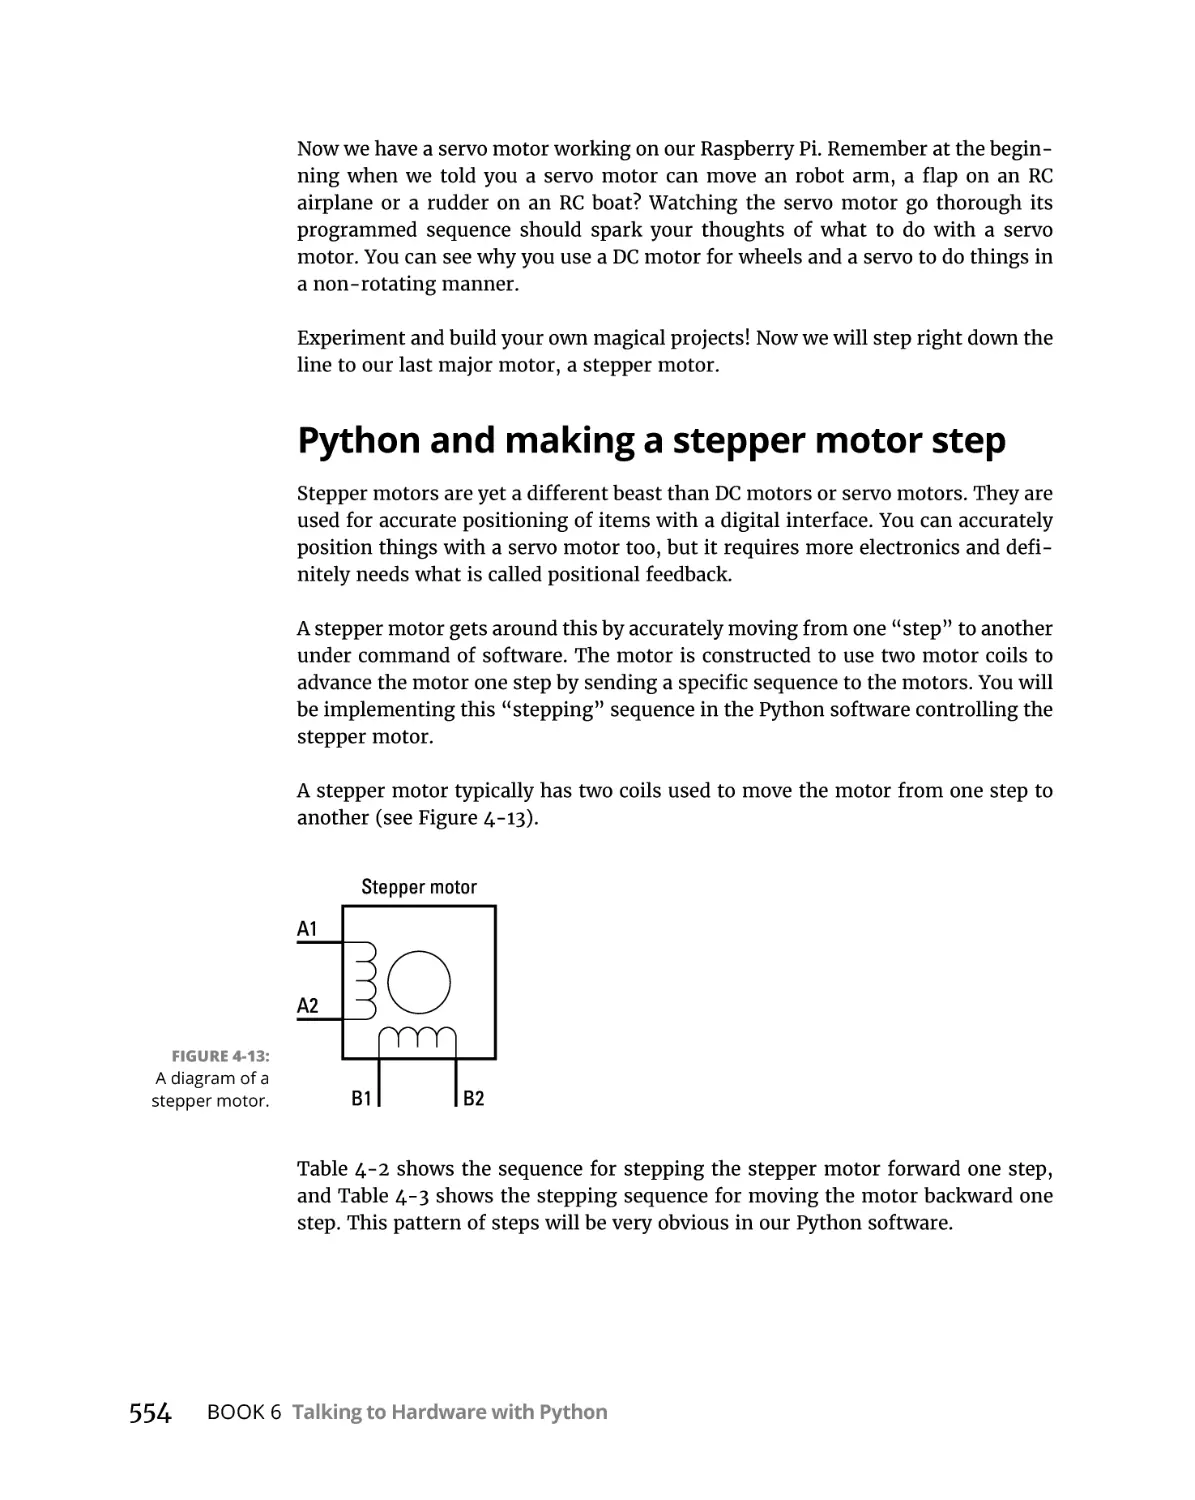 Python and making a stepper motor step